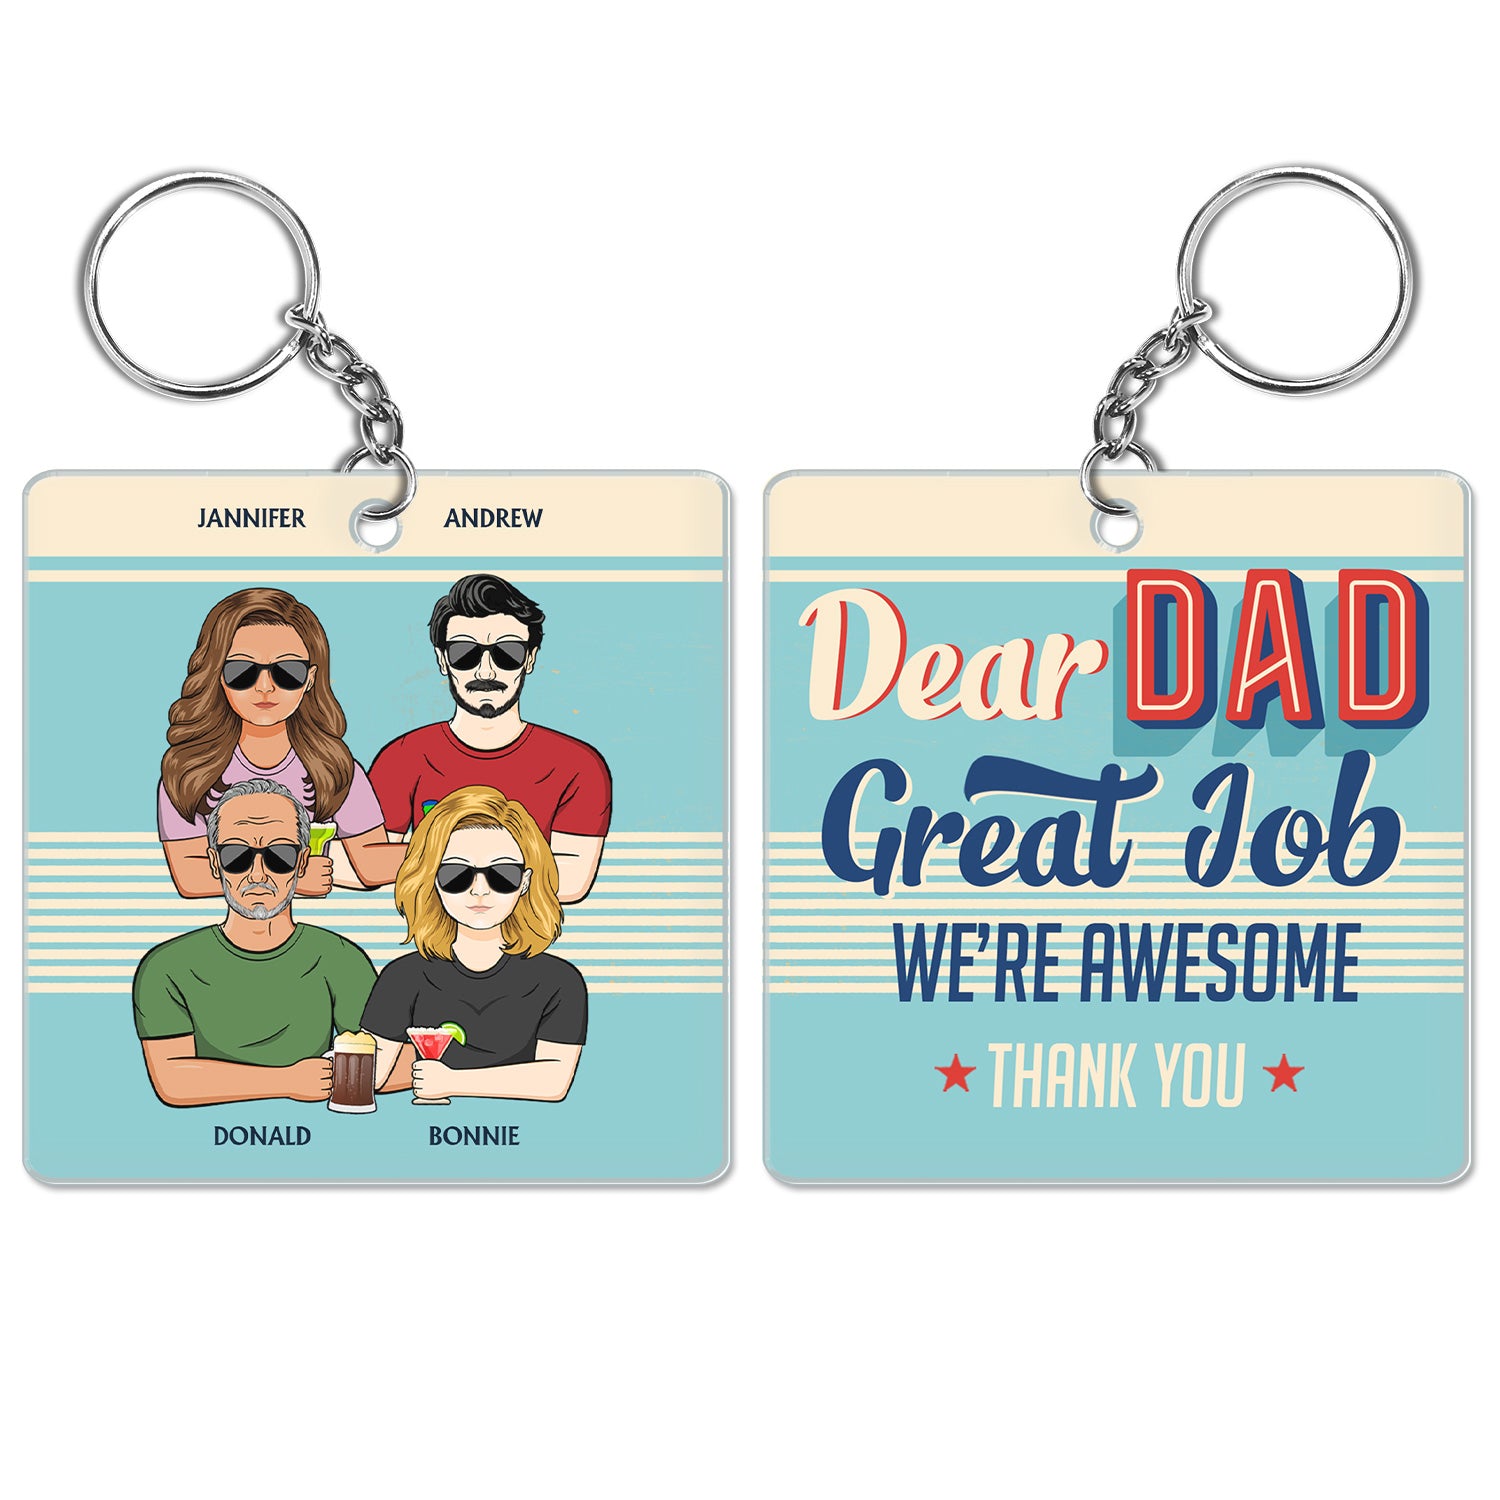 Dear Dad Great Job We're Awesome Thank You Retro - Birthday, Loving Gift For Father, Grandpa, Grandfather - Personalized Custom Acrylic Keychain